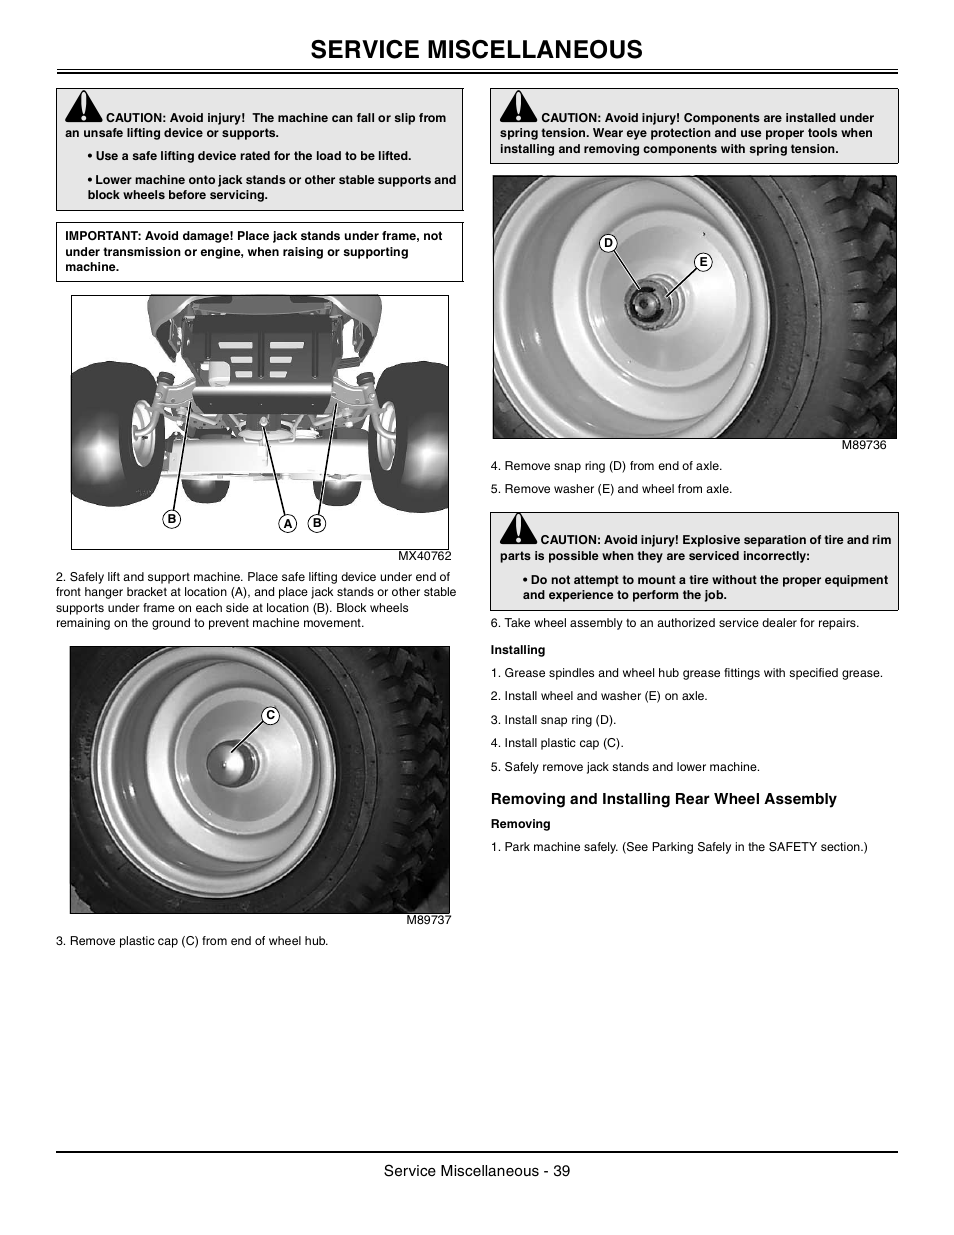 Installing, Removing and installing rear wheel assembly, Removing | Service miscellaneous | John Deere la105 User Manual | Page 40 / 52